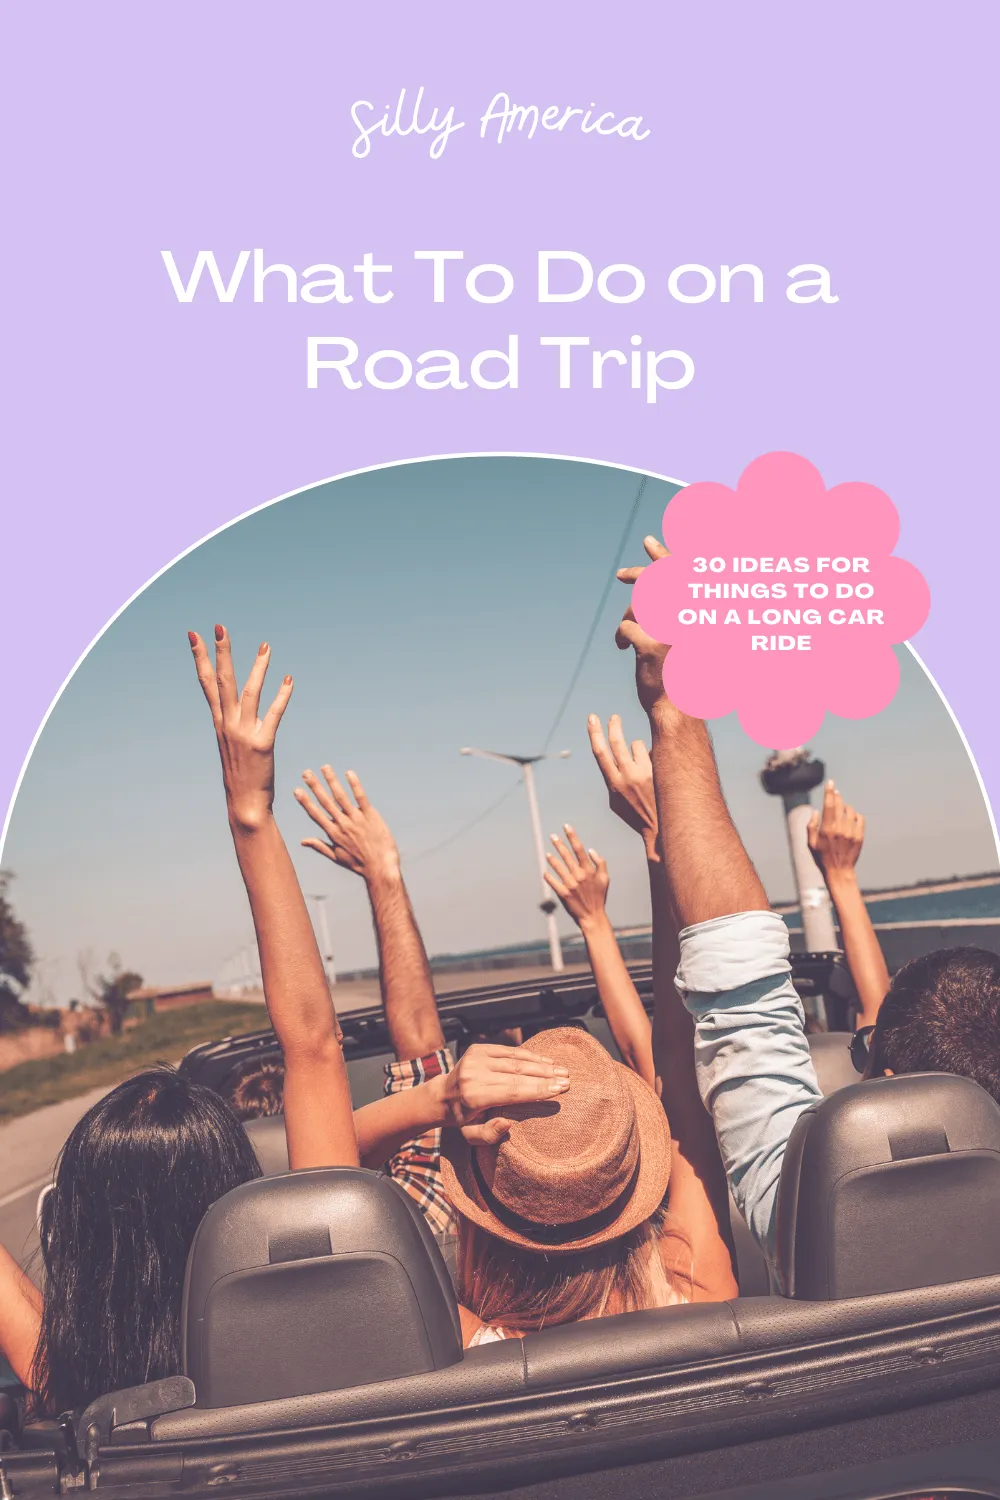 Planning on taking a long car trip but not totally sure what to do on a road trip? While there is no right or wrong answer, and everyone paves their own way, there are many common things to see, places to stop, and ways to pass the time. Need inspiration? Here are 30 ideas to help you plan an epic journey! #RoadTrip #RoadTripIdeas #RoadTripPlanning  #RoadTripPlanningTips #CrossCountryRoadTripPlanning #RoadTripPlanningIdeas #RoadTripIdeas 